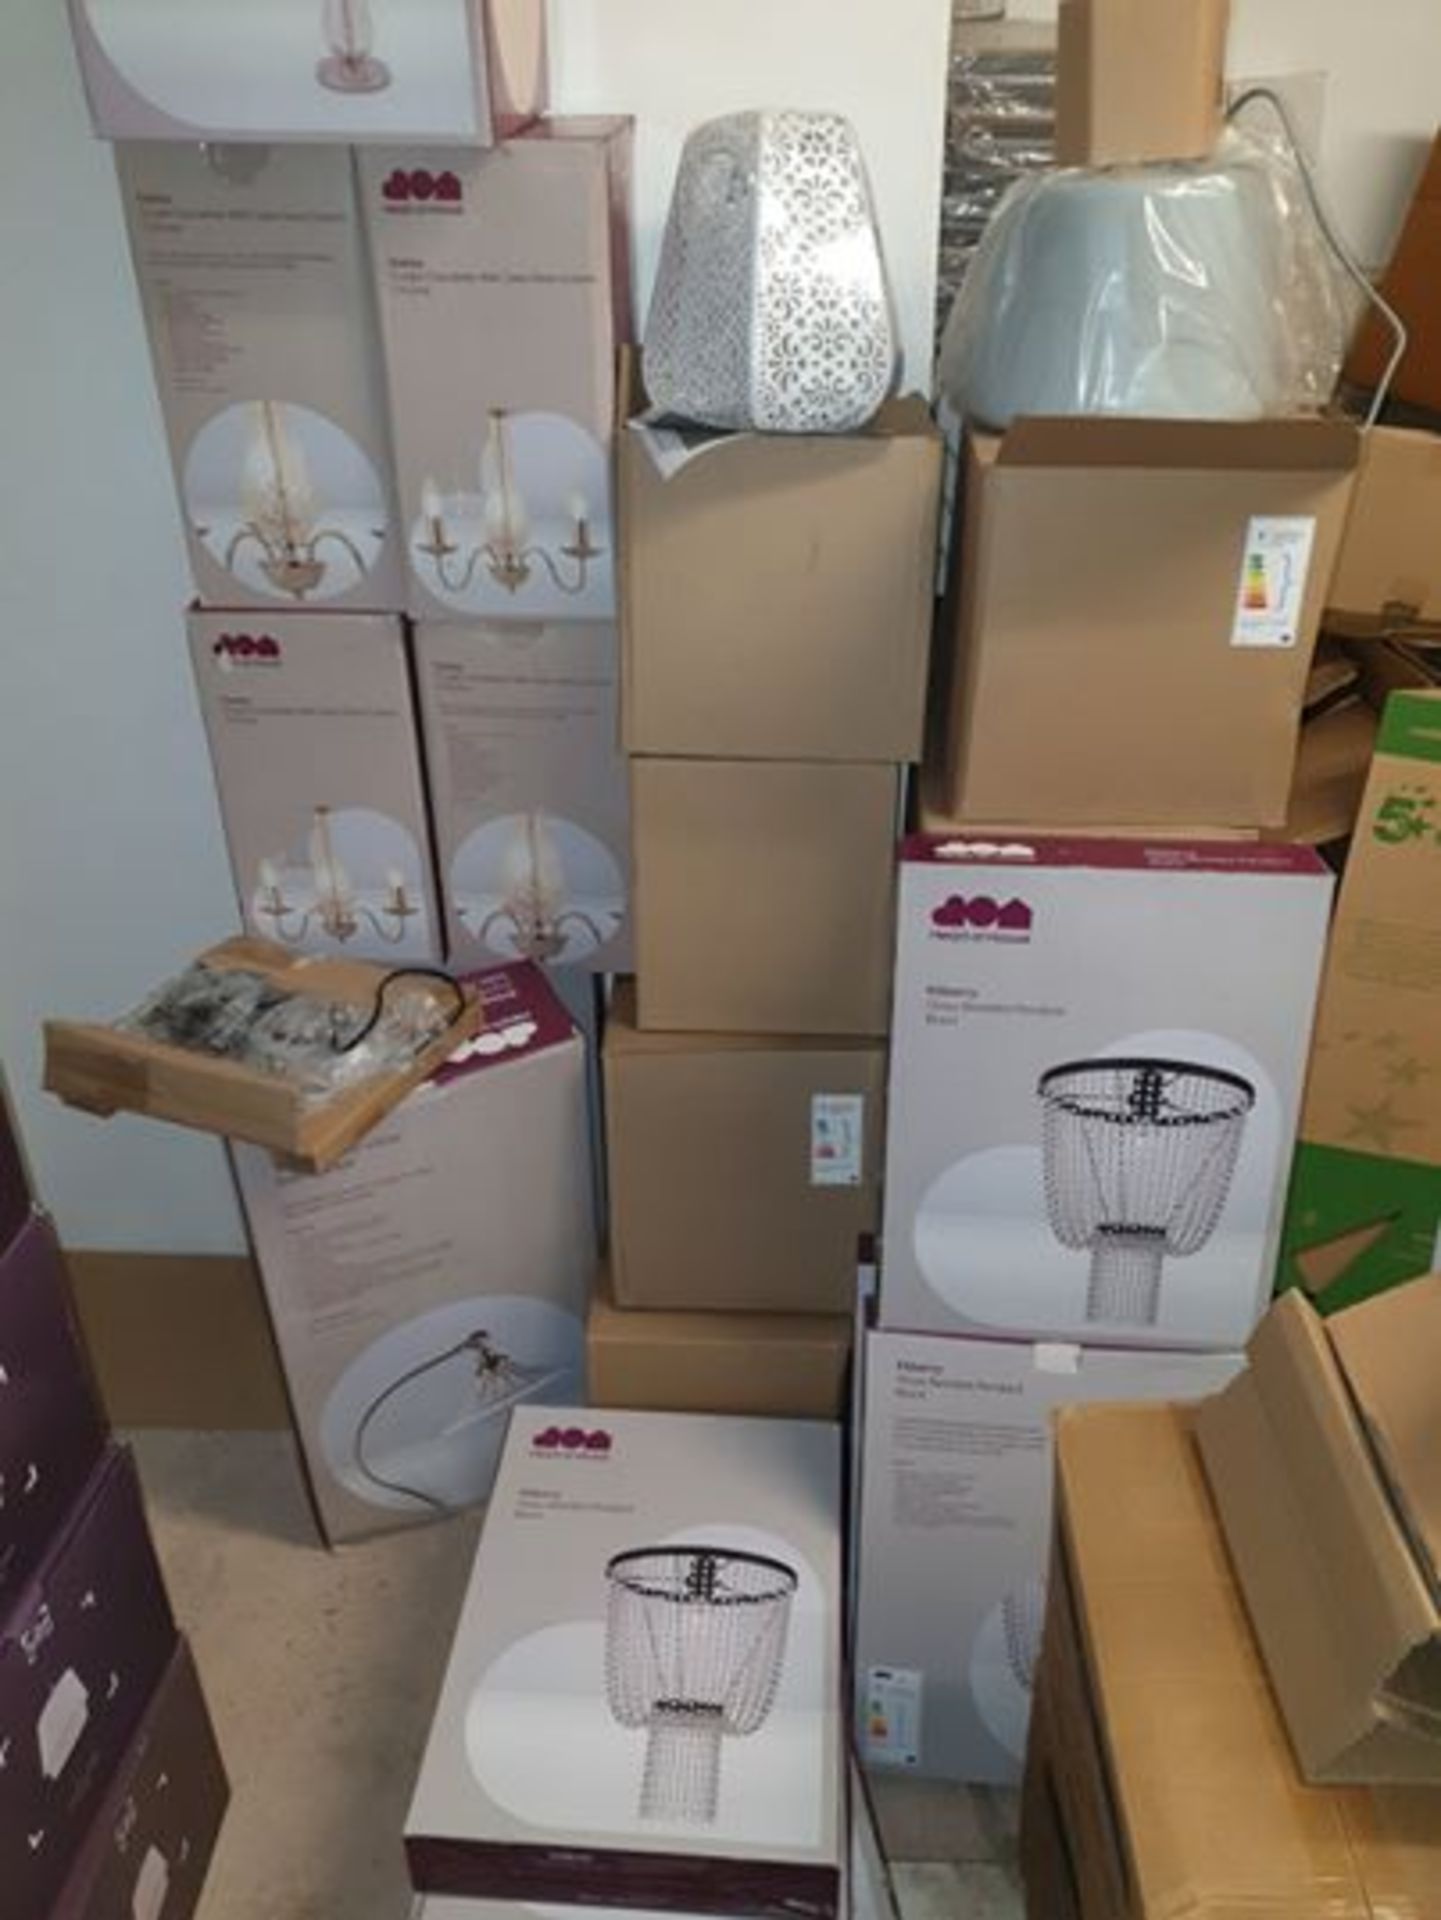 Branded Lamps And Lighting Rrp £1103.67